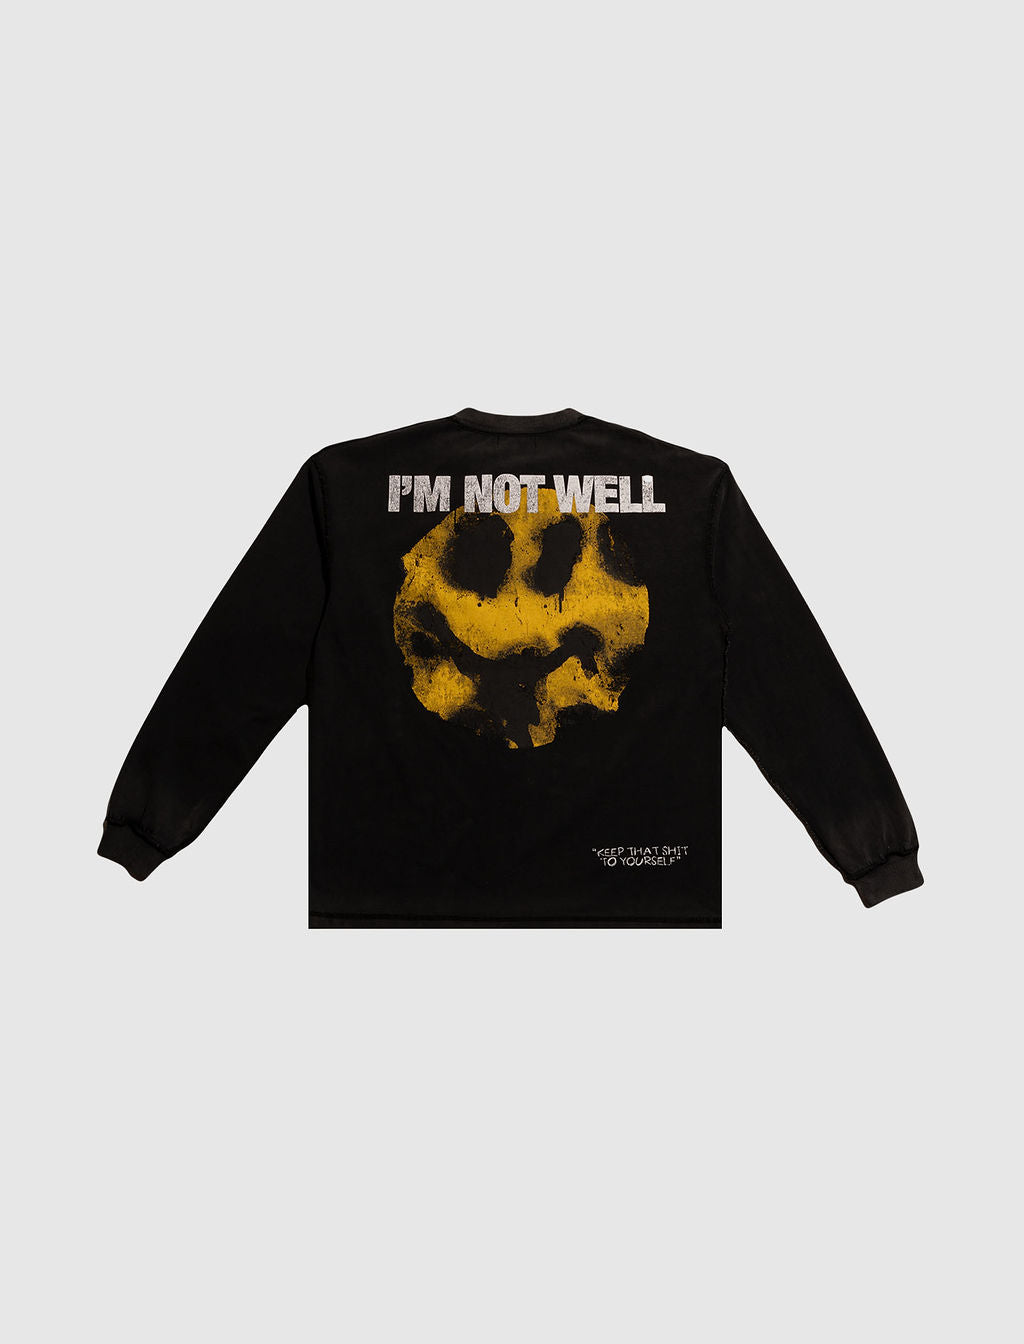 SMILEY FACE LONG SLEEVE T-SHIRT 2.0 IN WASHED BLACK